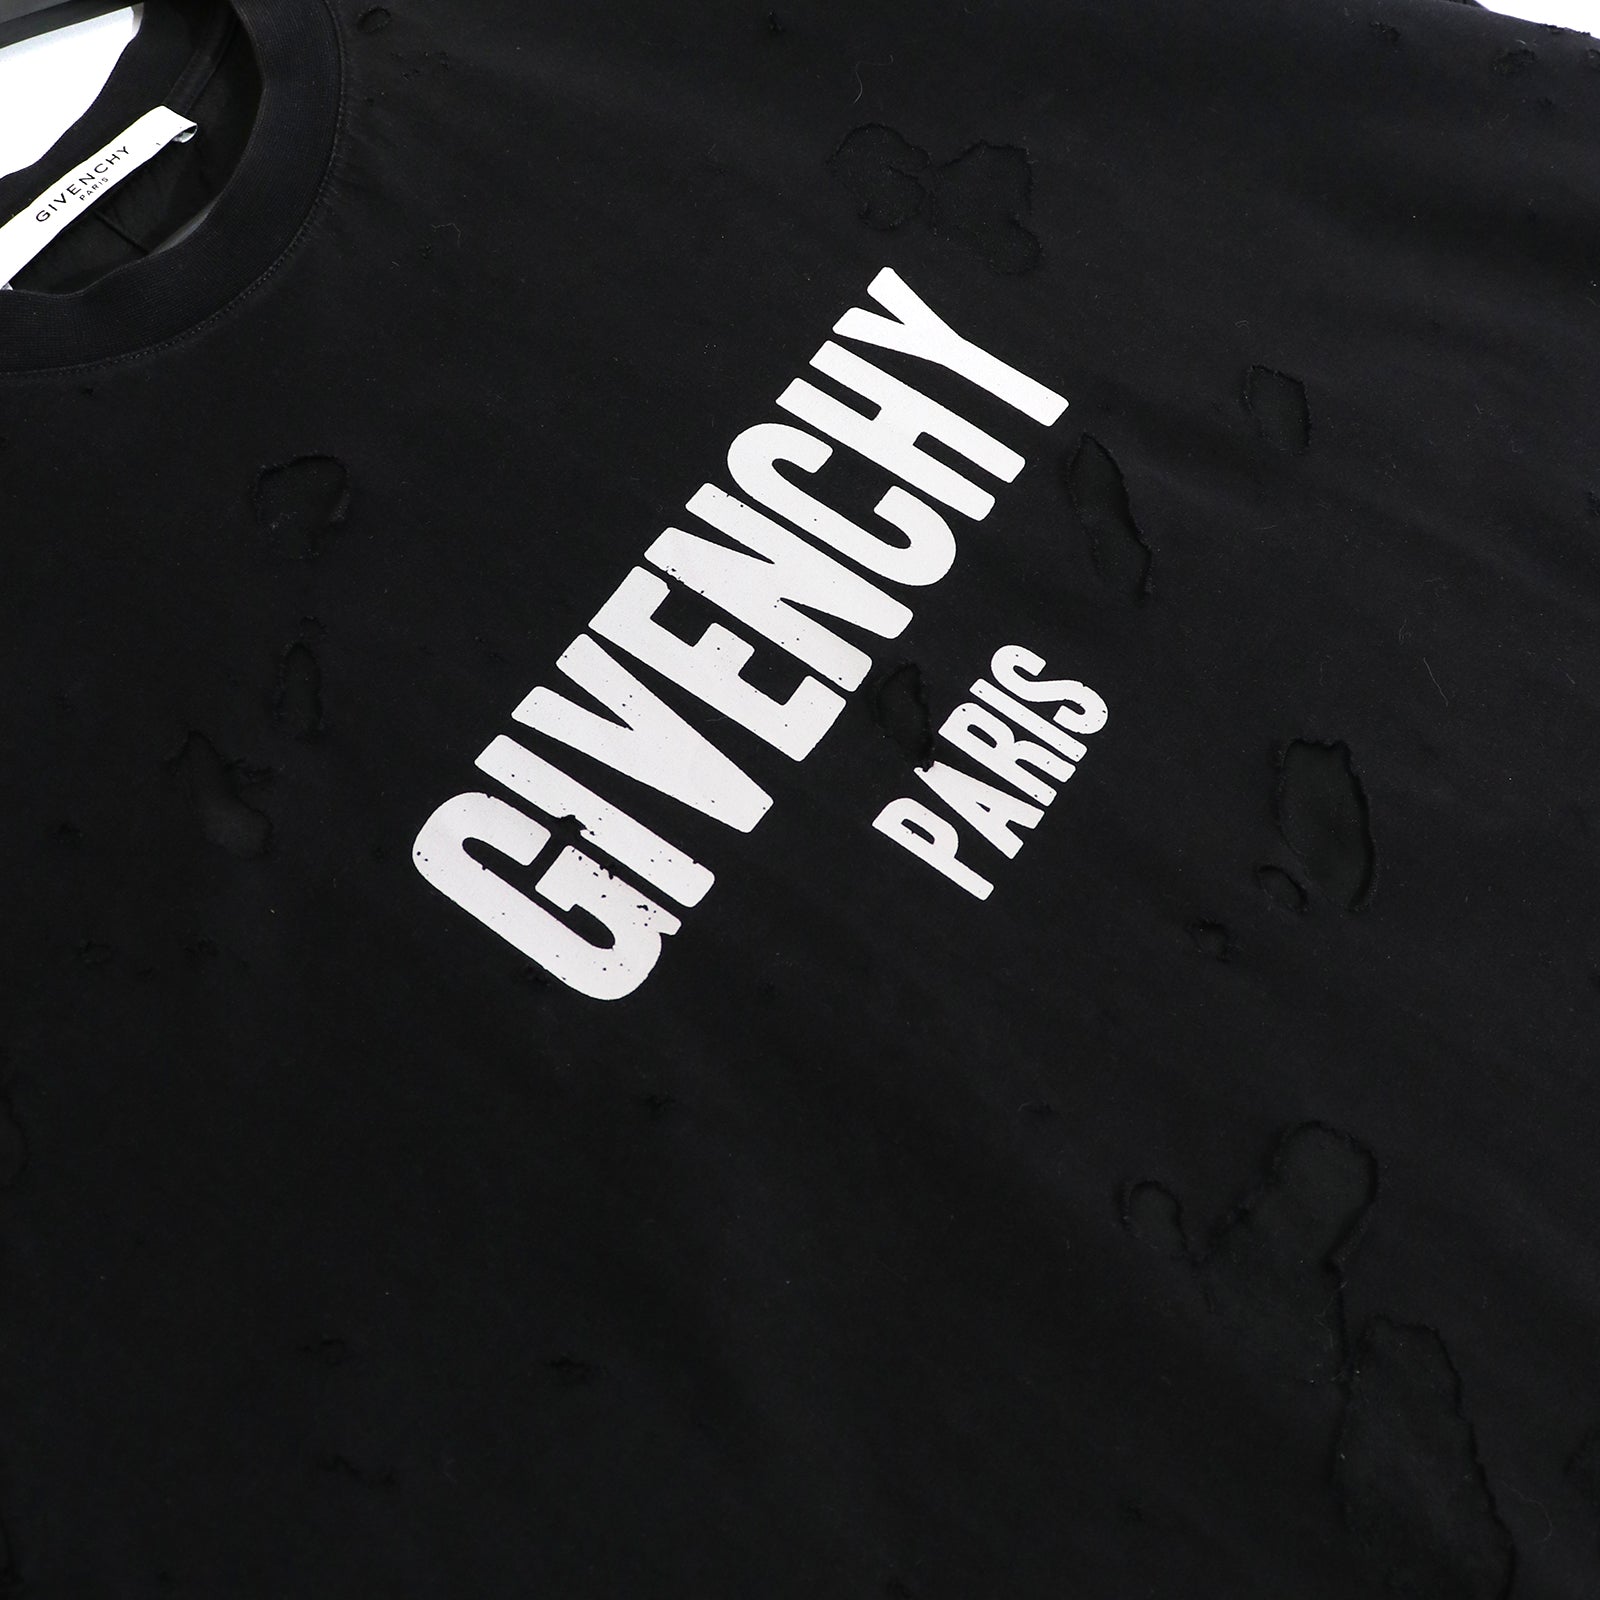 GIVENCHY - Tee-shirt Destroy (S)